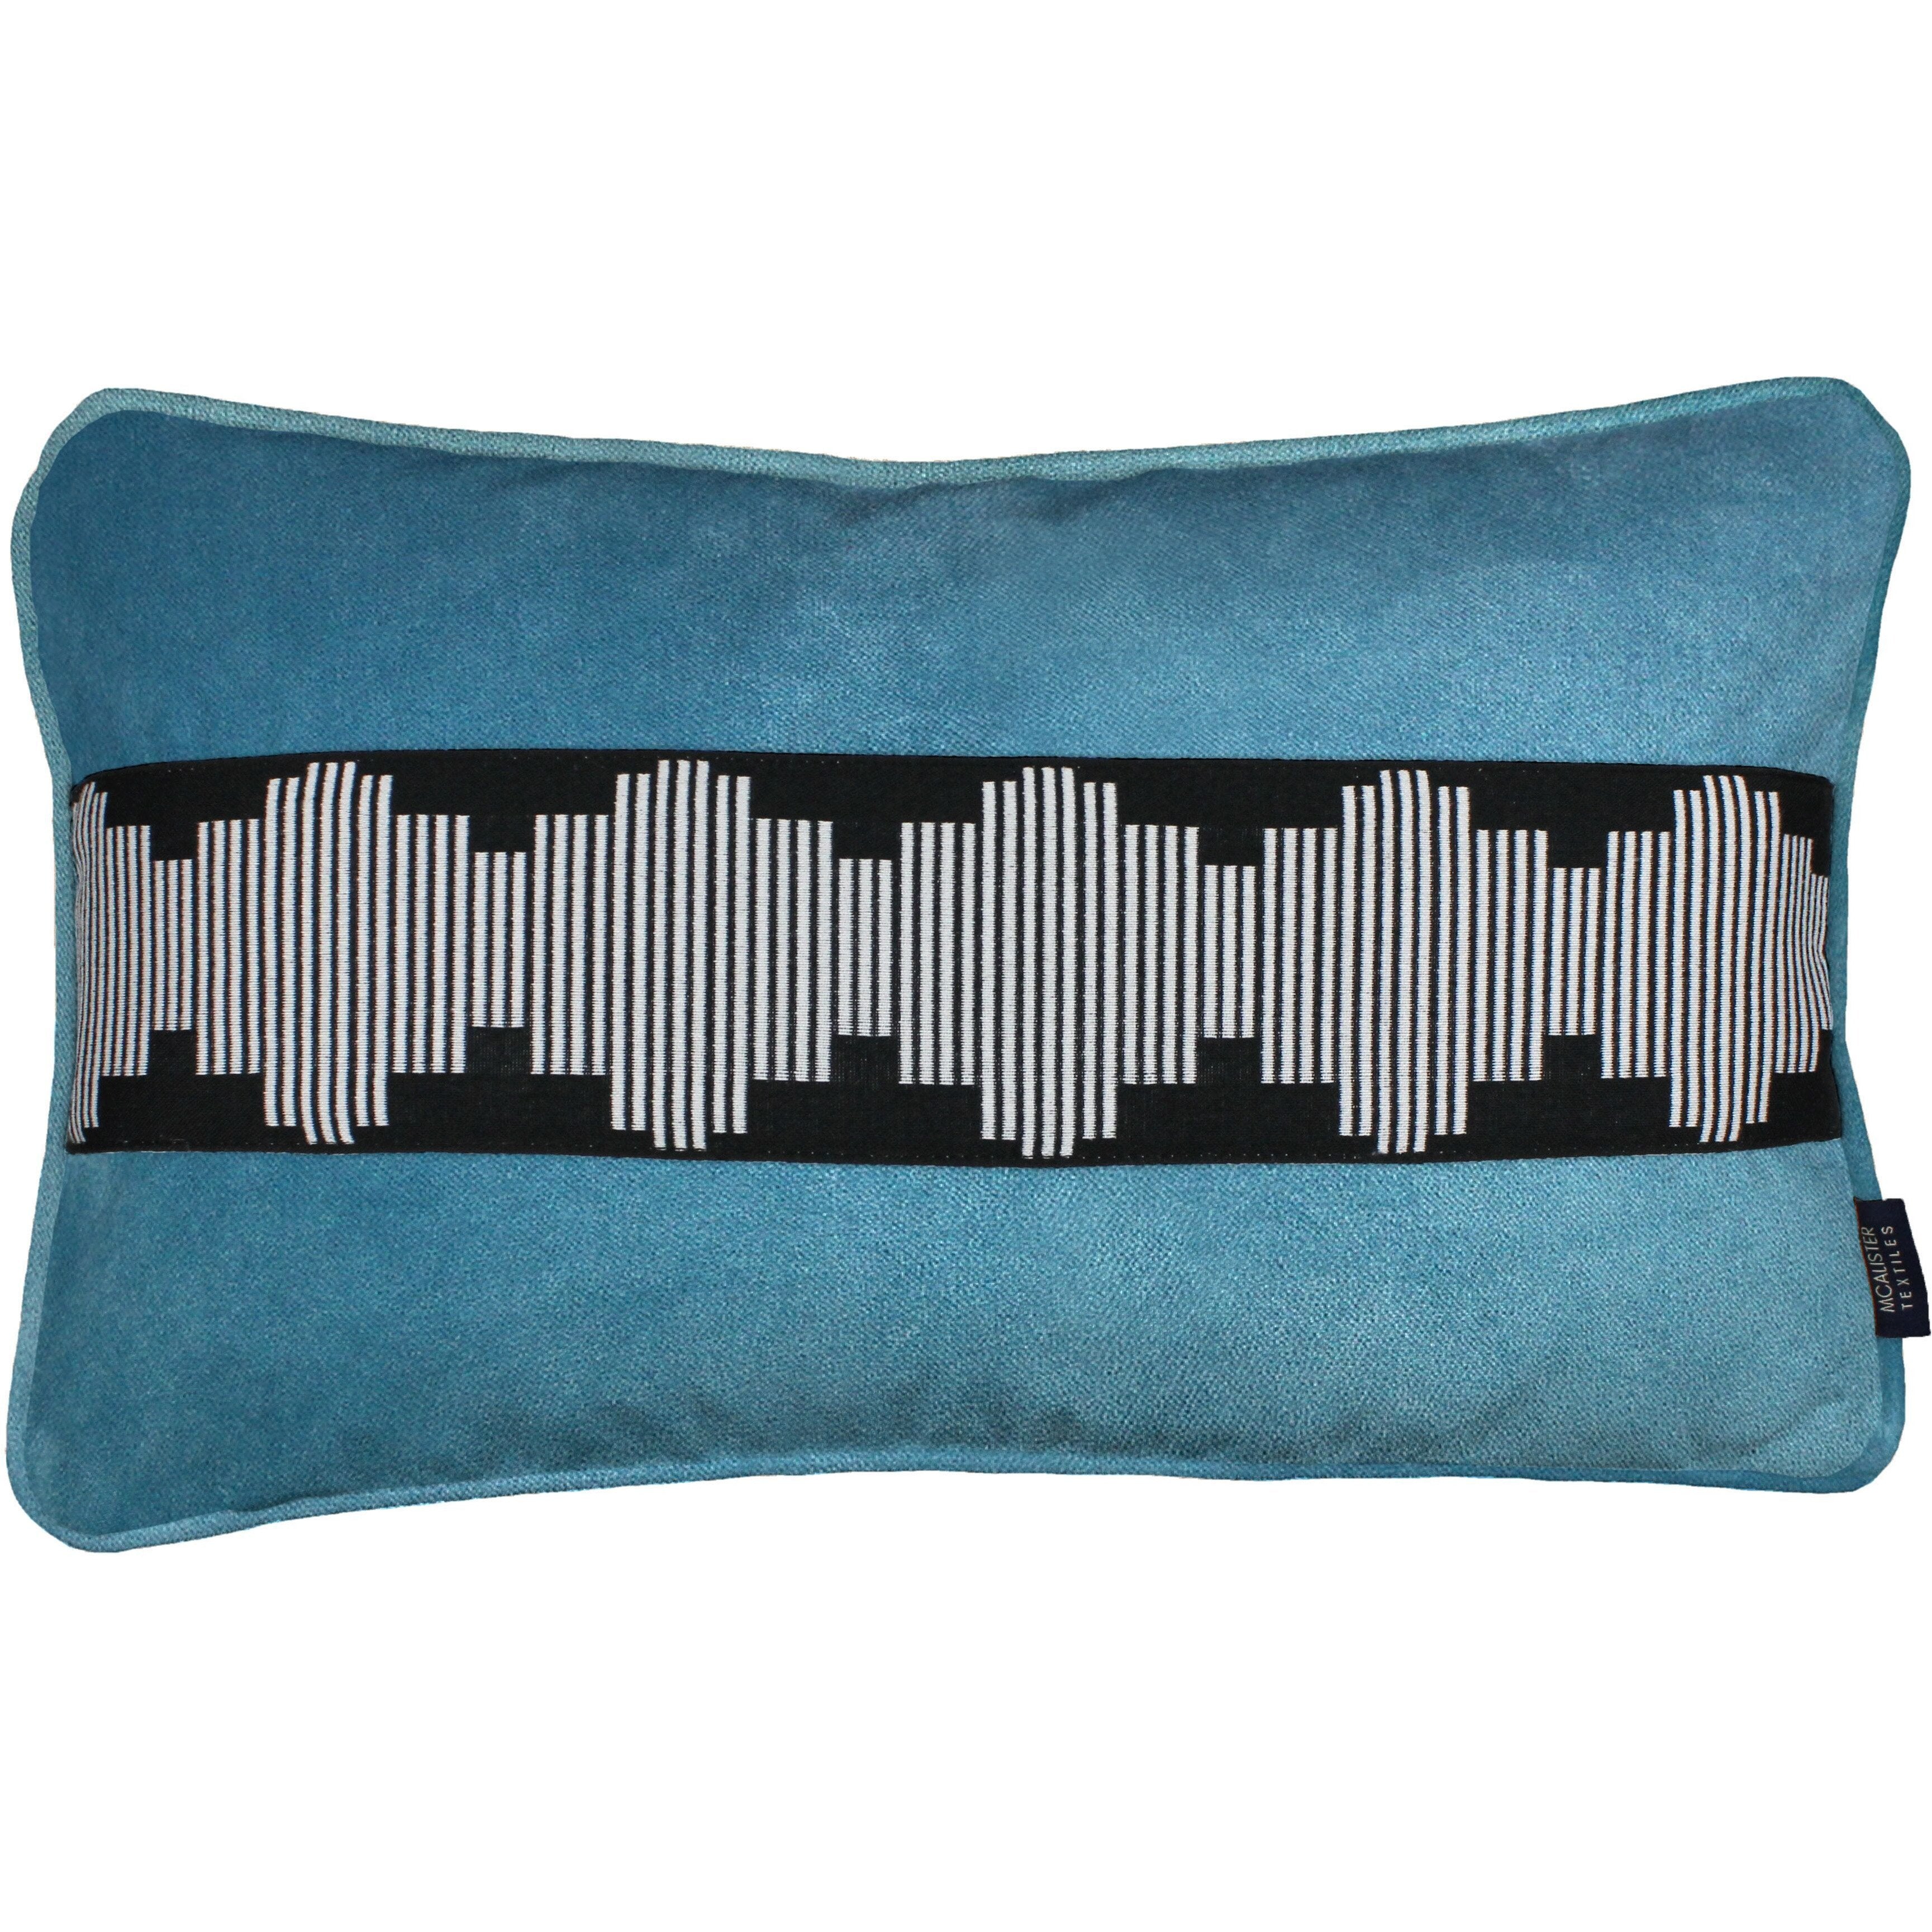 McAlister Textiles Maya Striped Duck Egg Blue Velvet Cushion Cushions and Covers Cover Only 50cm x 30cm 